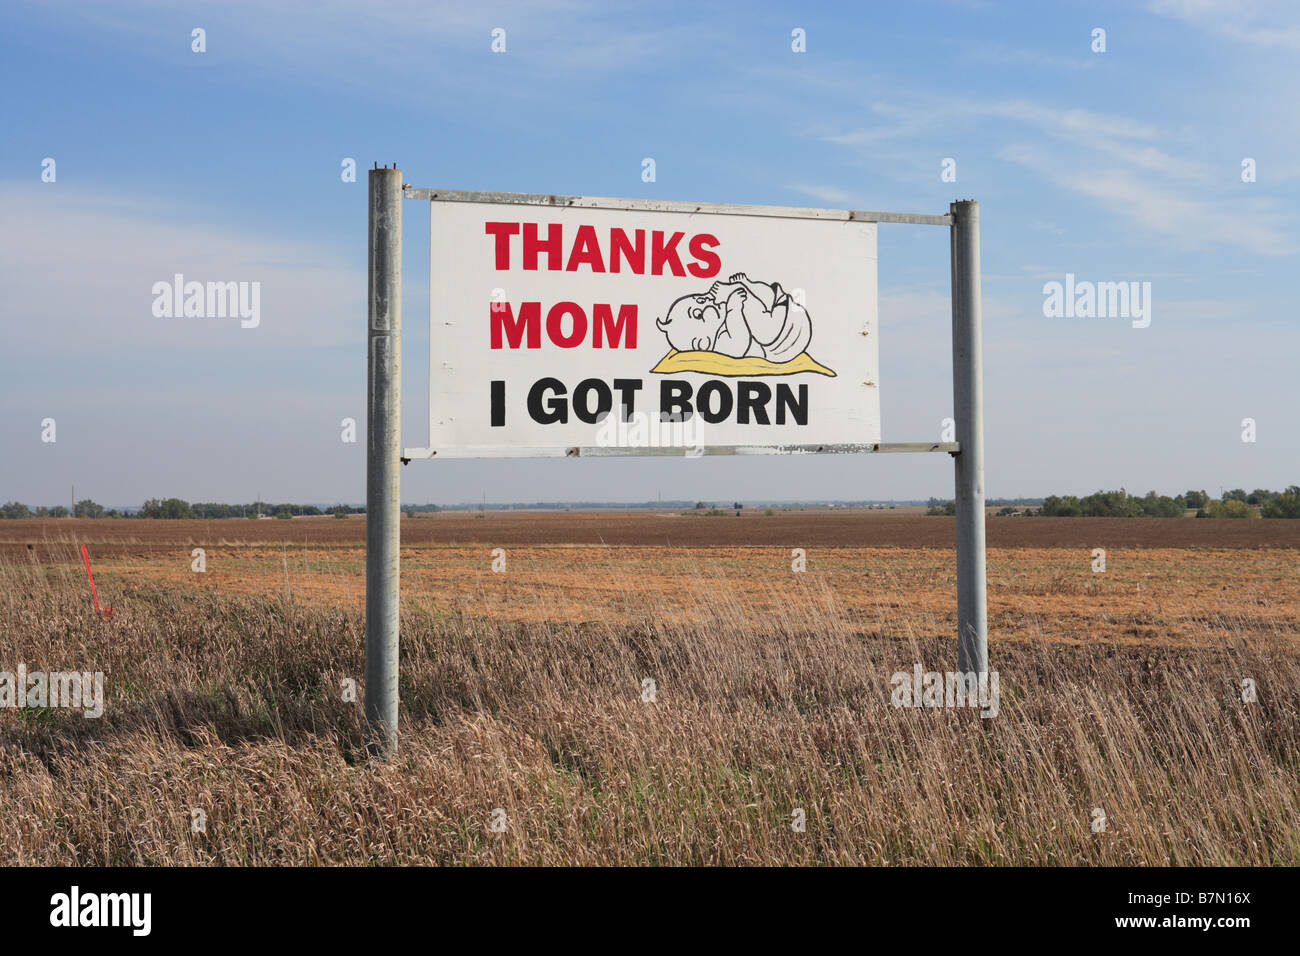 A sign in a rural Kansas field showing a baby and reads:   'Thanks Mom I Got Born' Stock Photo